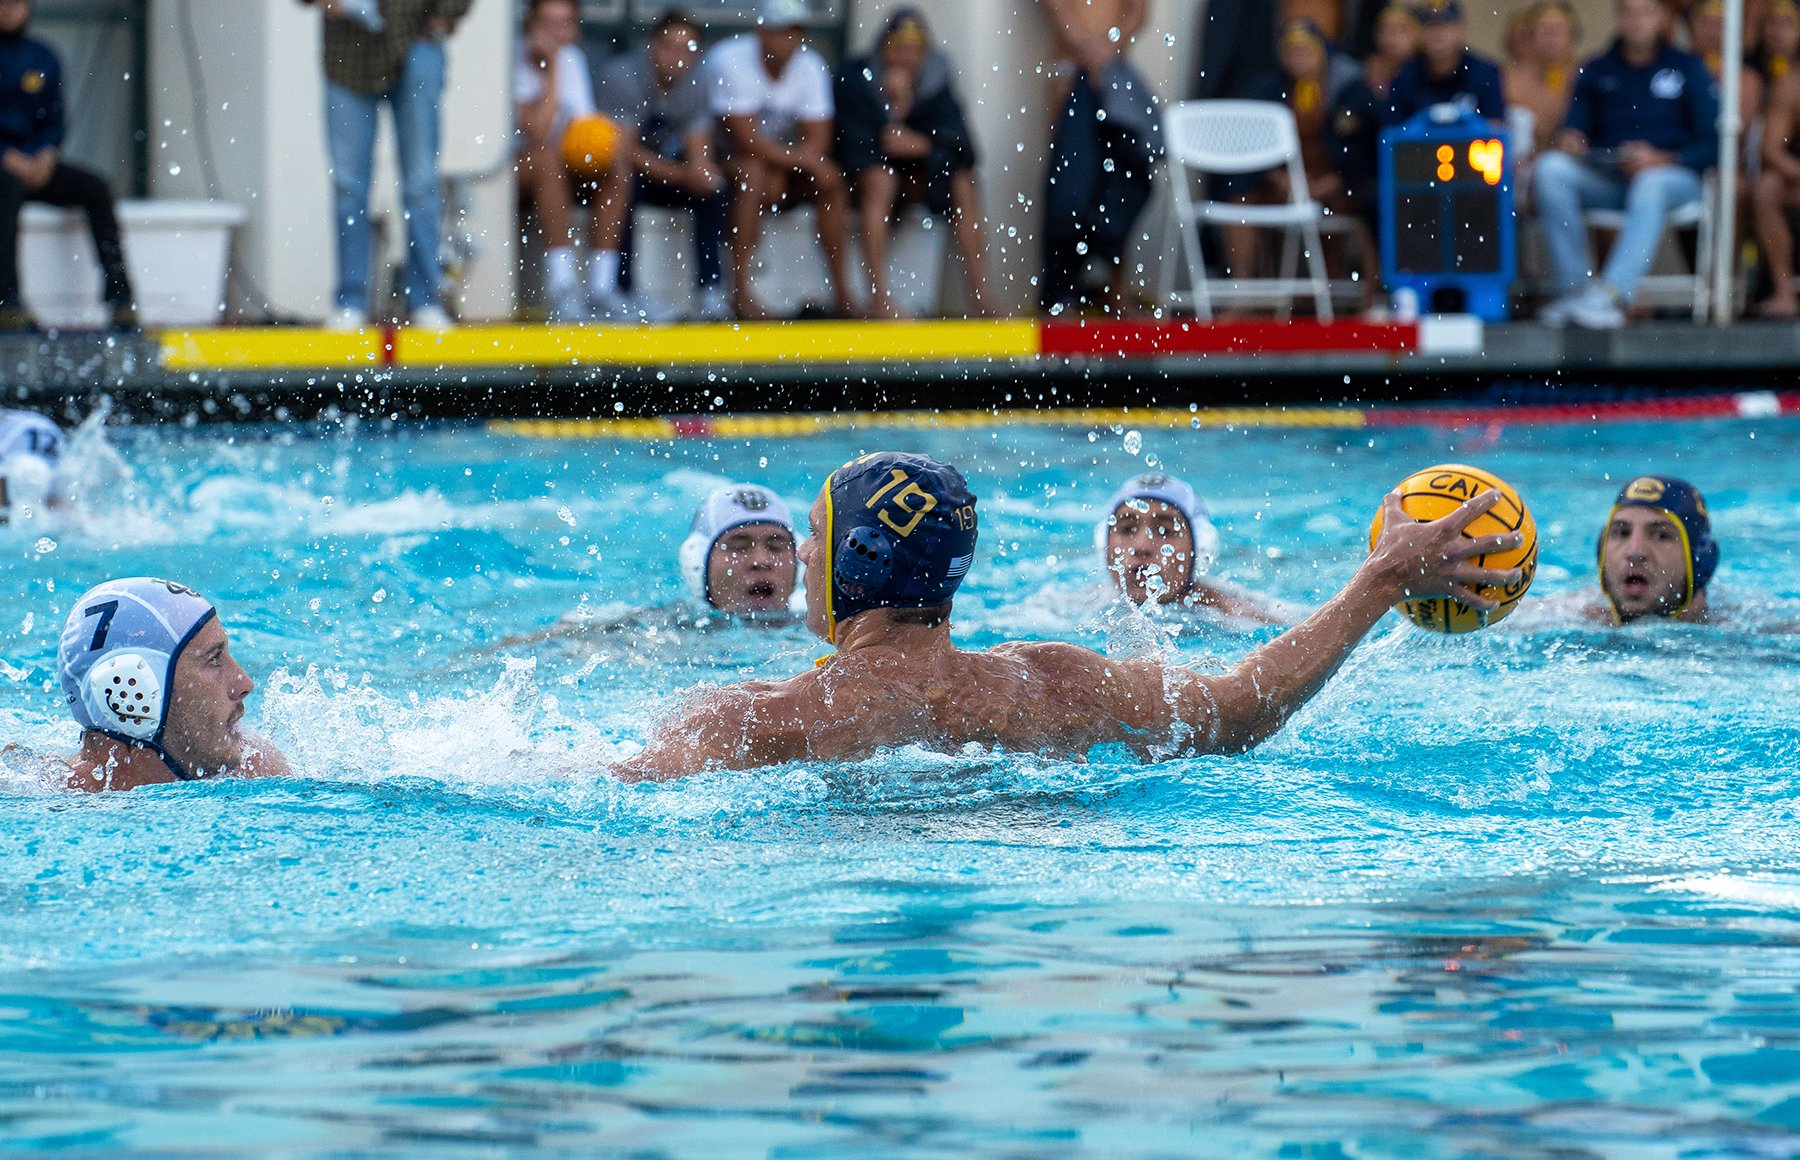 Road Trip: Cal men’s water polo heads to MPSF Invitational following undefeated start